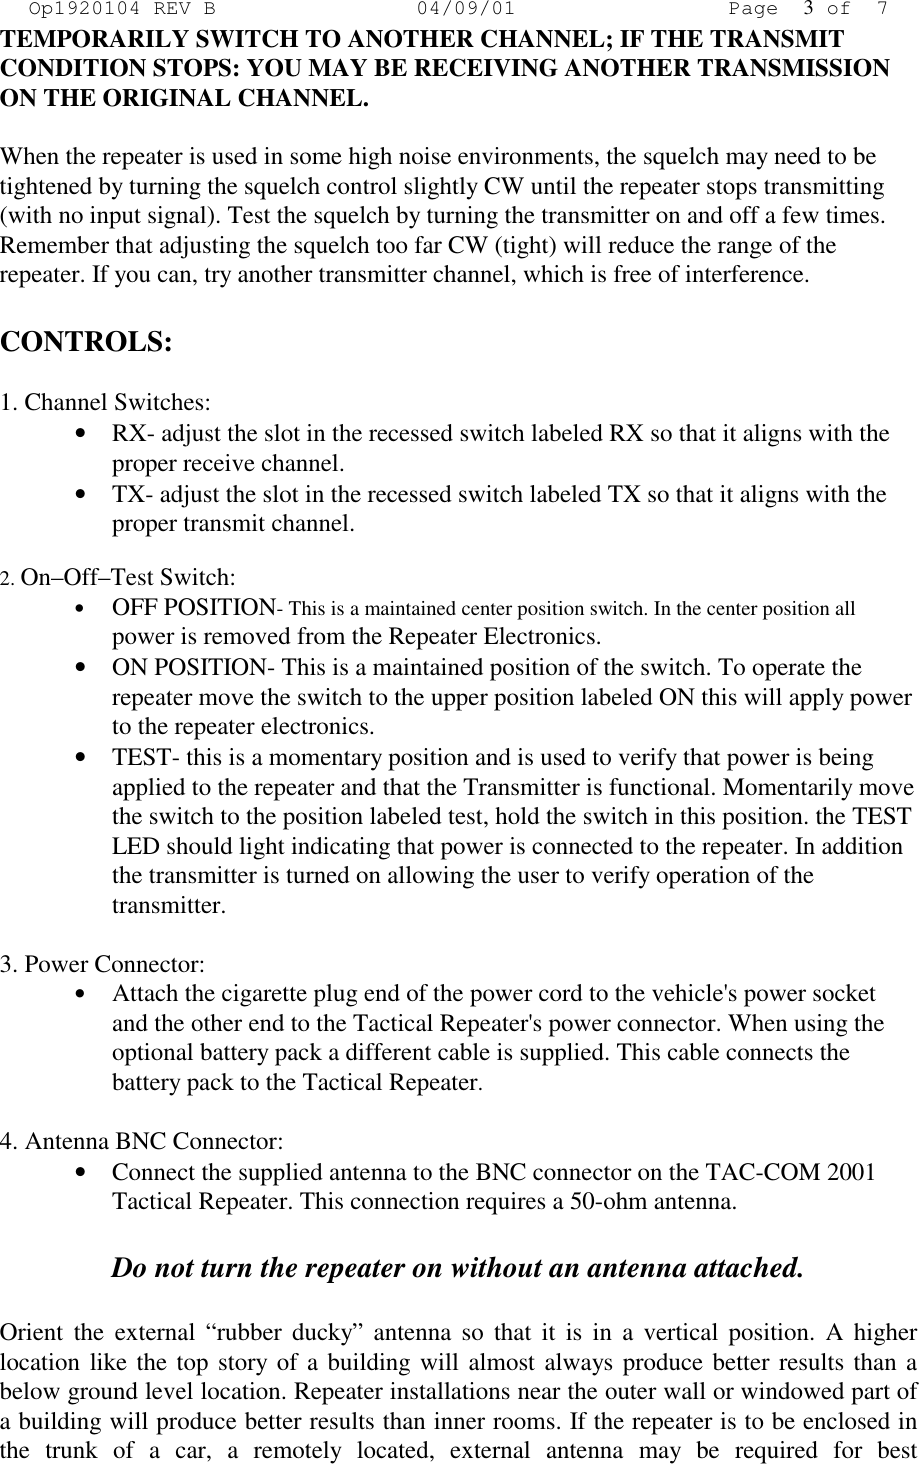 Op1920104 REV B 04/09/01 Page 3of 7 TEMPORARILY SWITCH TO ANOTHER CHANNEL; IF THE TRANSMIT CONDITION STOPS: YOU MAY BE RECEIVING ANOTHER TRANSMISSION ON THE ORIGINAL CHANNEL.   When the repeater is used in some high noise environments, the squelch may need to be tightened by turning the squelch control slightly CW until the repeater stops transmitting (with no input signal). Test the squelch by turning the transmitter on and off a few times. Remember that adjusting the squelch too far CW (tight) will reduce the range of the repeater. If you can, try another transmitter channel, which is free of interference.  CONTROLS:  1. Channel Switches: •  RX- adjust the slot in the recessed switch labeled RX so that it aligns with the proper receive channel. •  TX- adjust the slot in the recessed switch labeled TX so that it aligns with the proper transmit channel.  2. On–Off–Test Switch: •  OFF POSITION- This is a maintained center position switch. In the center position all power is removed from the Repeater Electronics. •  ON POSITION- This is a maintained position of the switch. To operate the repeater move the switch to the upper position labeled ON this will apply power to the repeater electronics. •  TEST- this is a momentary position and is used to verify that power is being applied to the repeater and that the Transmitter is functional. Momentarily move the switch to the position labeled test, hold the switch in this position. the TEST LED should light indicating that power is connected to the repeater. In addition the transmitter is turned on allowing the user to verify operation of the transmitter.  3. Power Connector: •  Attach the cigarette plug end of the power cord to the vehicle&apos;s power socket and the other end to the Tactical Repeater&apos;s power connector. When using the optional battery pack a different cable is supplied. This cable connects the battery pack to the Tactical Repeater.  4. Antenna BNC Connector: •  Connect the supplied antenna to the BNC connector on the TAC-COM 2001 Tactical Repeater. This connection requires a 50-ohm antenna.   Do not turn the repeater on without an antenna attached.  Orient the external “rubber ducky” antenna so that it is in a vertical position. A higher location like the top story of a building will almost always produce better results than a below ground level location. Repeater installations near the outer wall or windowed part of a building will produce better results than inner rooms. If the repeater is to be enclosed in the trunk of a car, a remotely located, external antenna may be required for best 